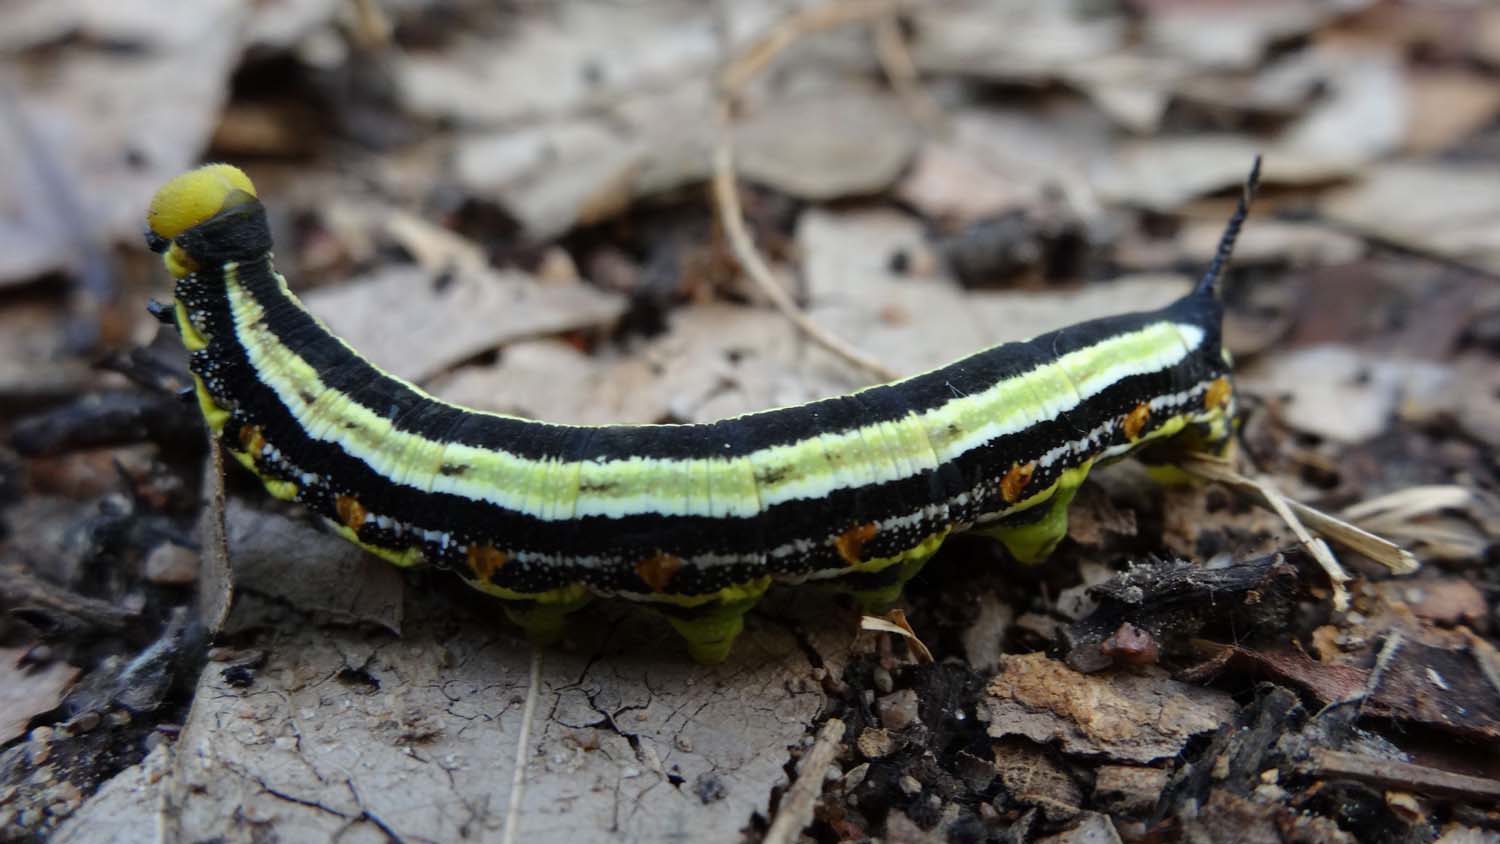 colourful caterpillar, wonder what butterfly this will become